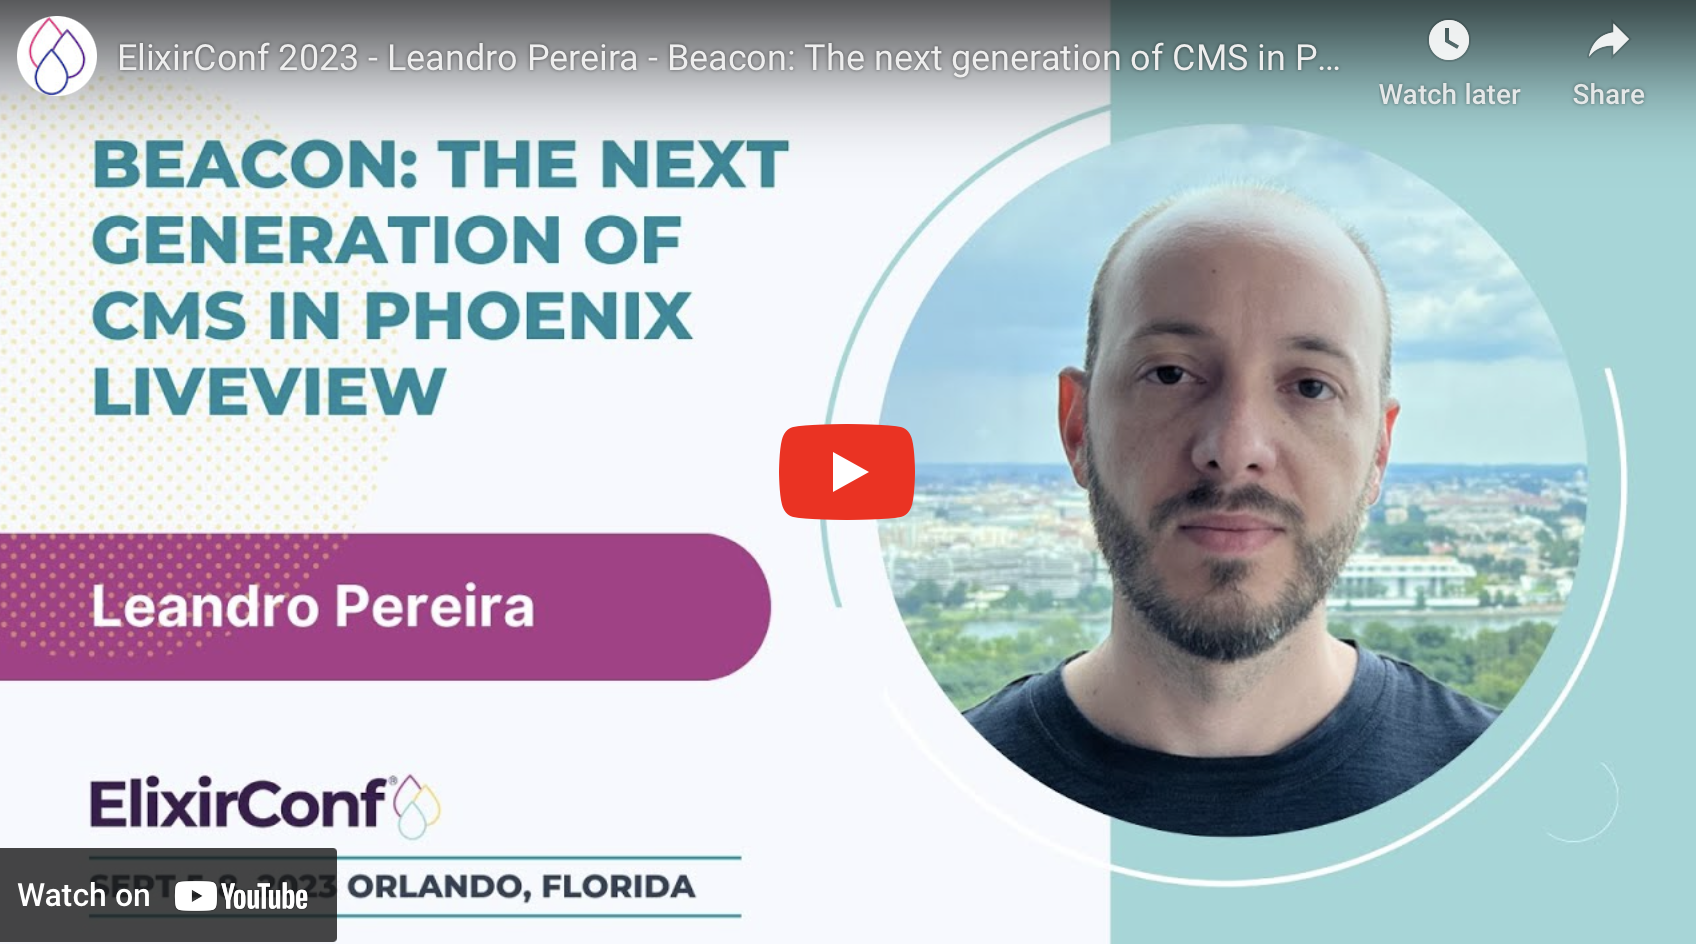 YouTube card - ElixirConf 2023 - Leandro Pereira - Beacon: The next generation of CMS in Phoenix LiveView